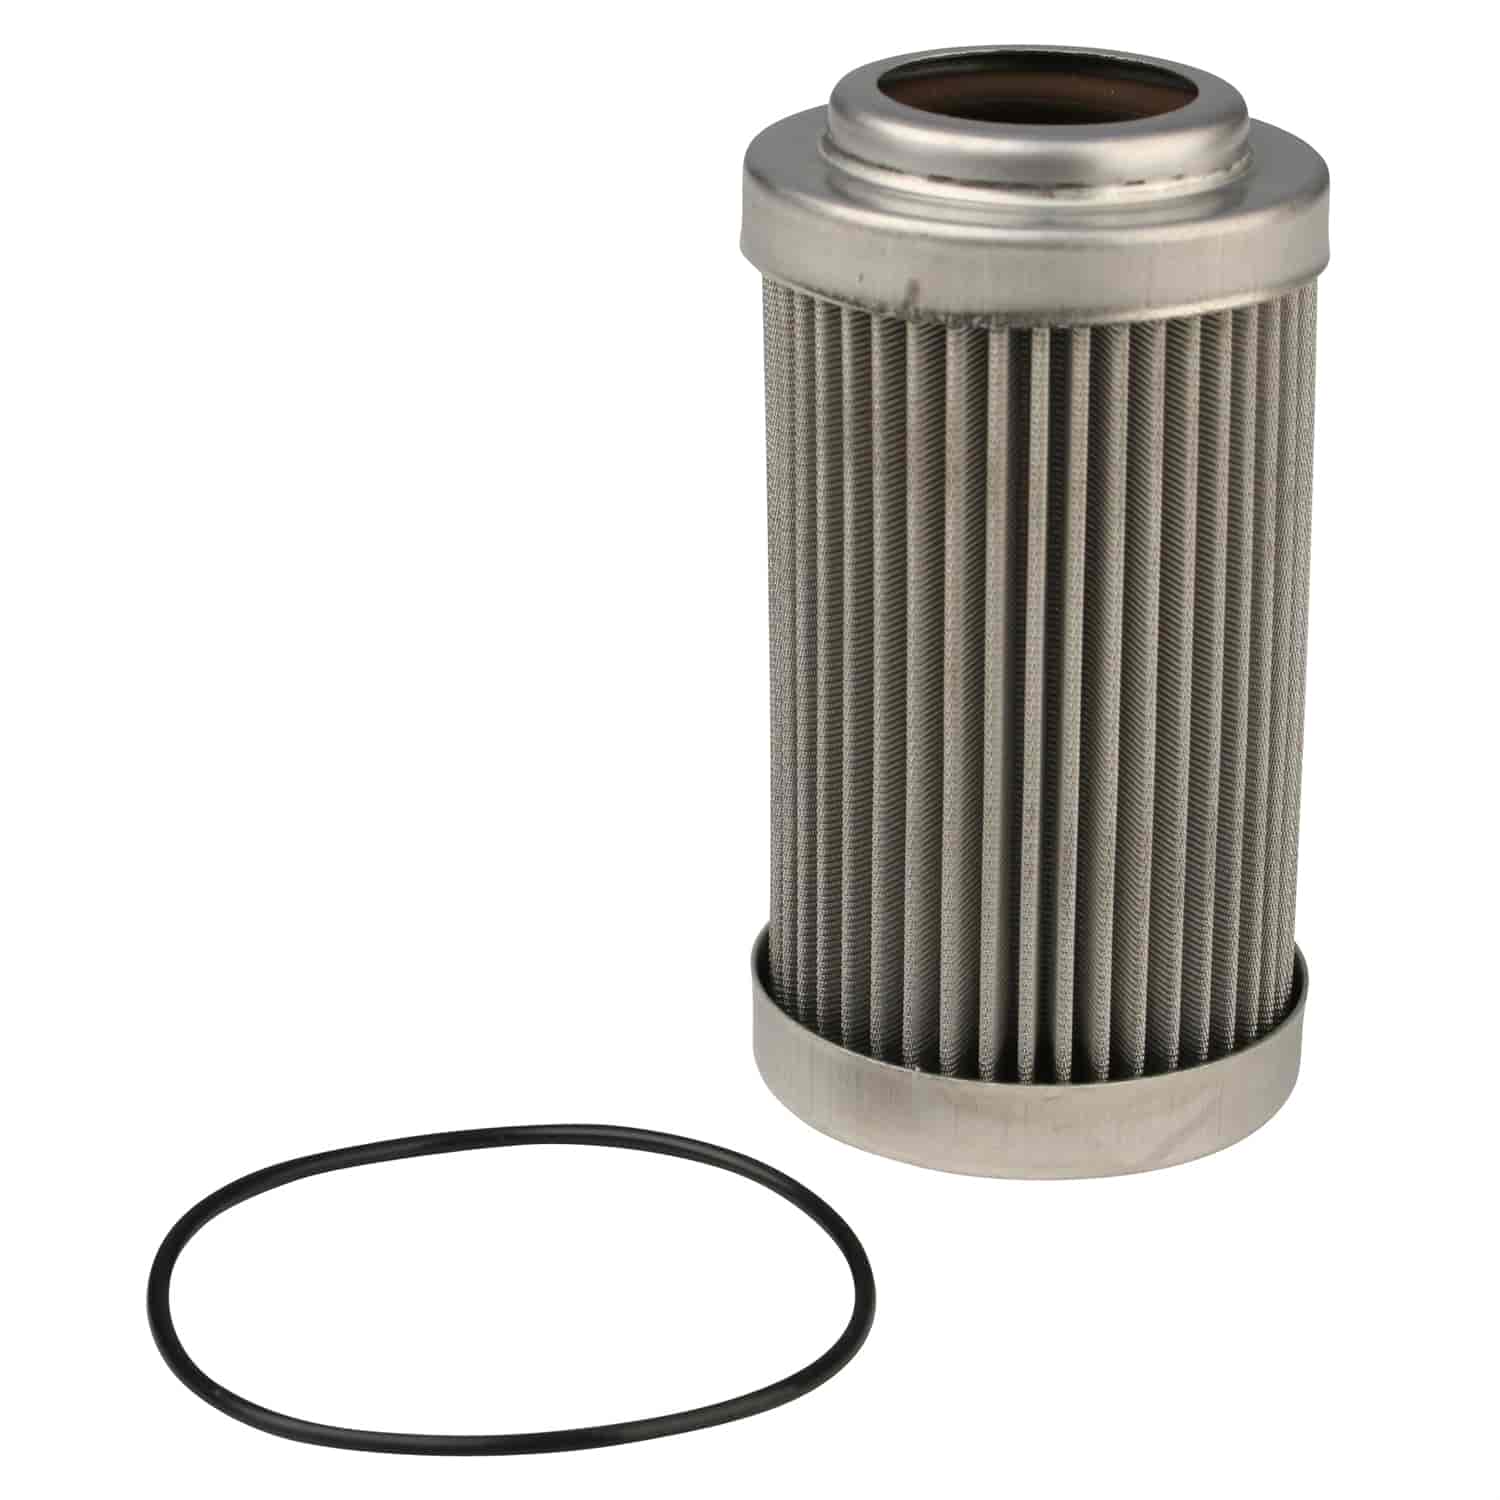 Replacement Fuel Filter Element 40 micron for part